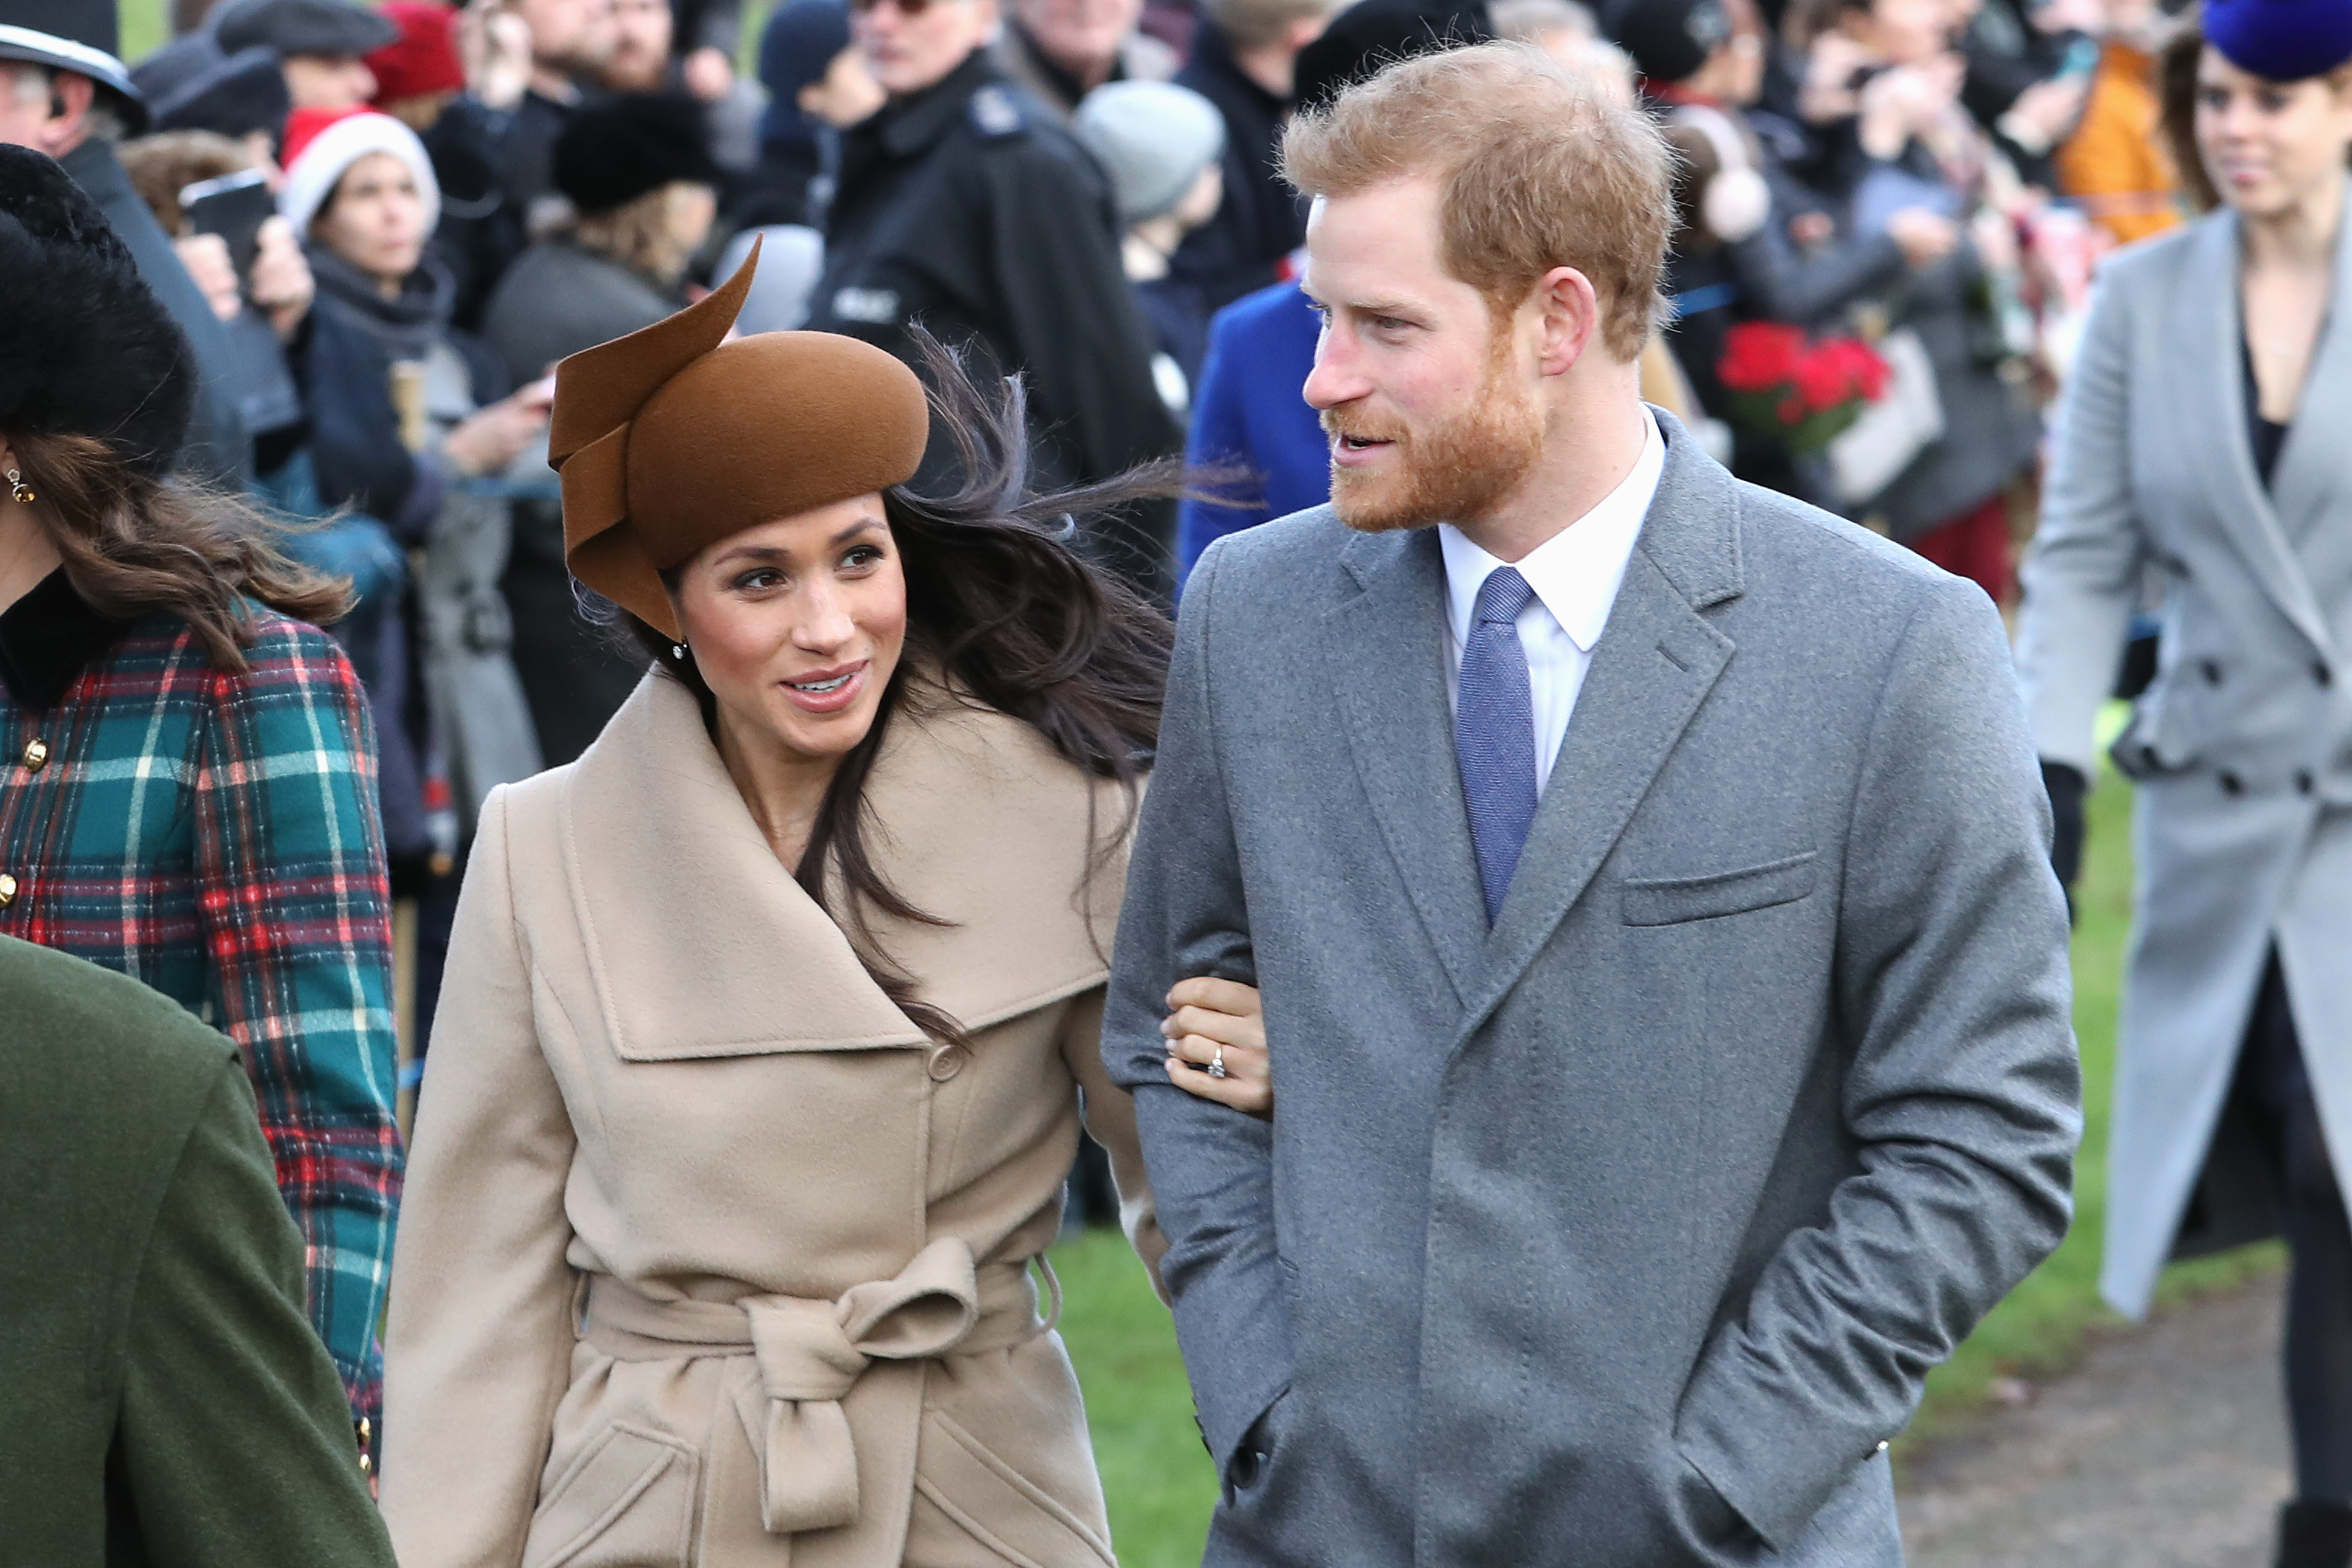 Meghan Markle and Prince Harry attend Christmas Day Church service at Church of St Mary Magdalene on December 25, 2017 in King's Lynn, England. (Chris Jackson—Getty Images)